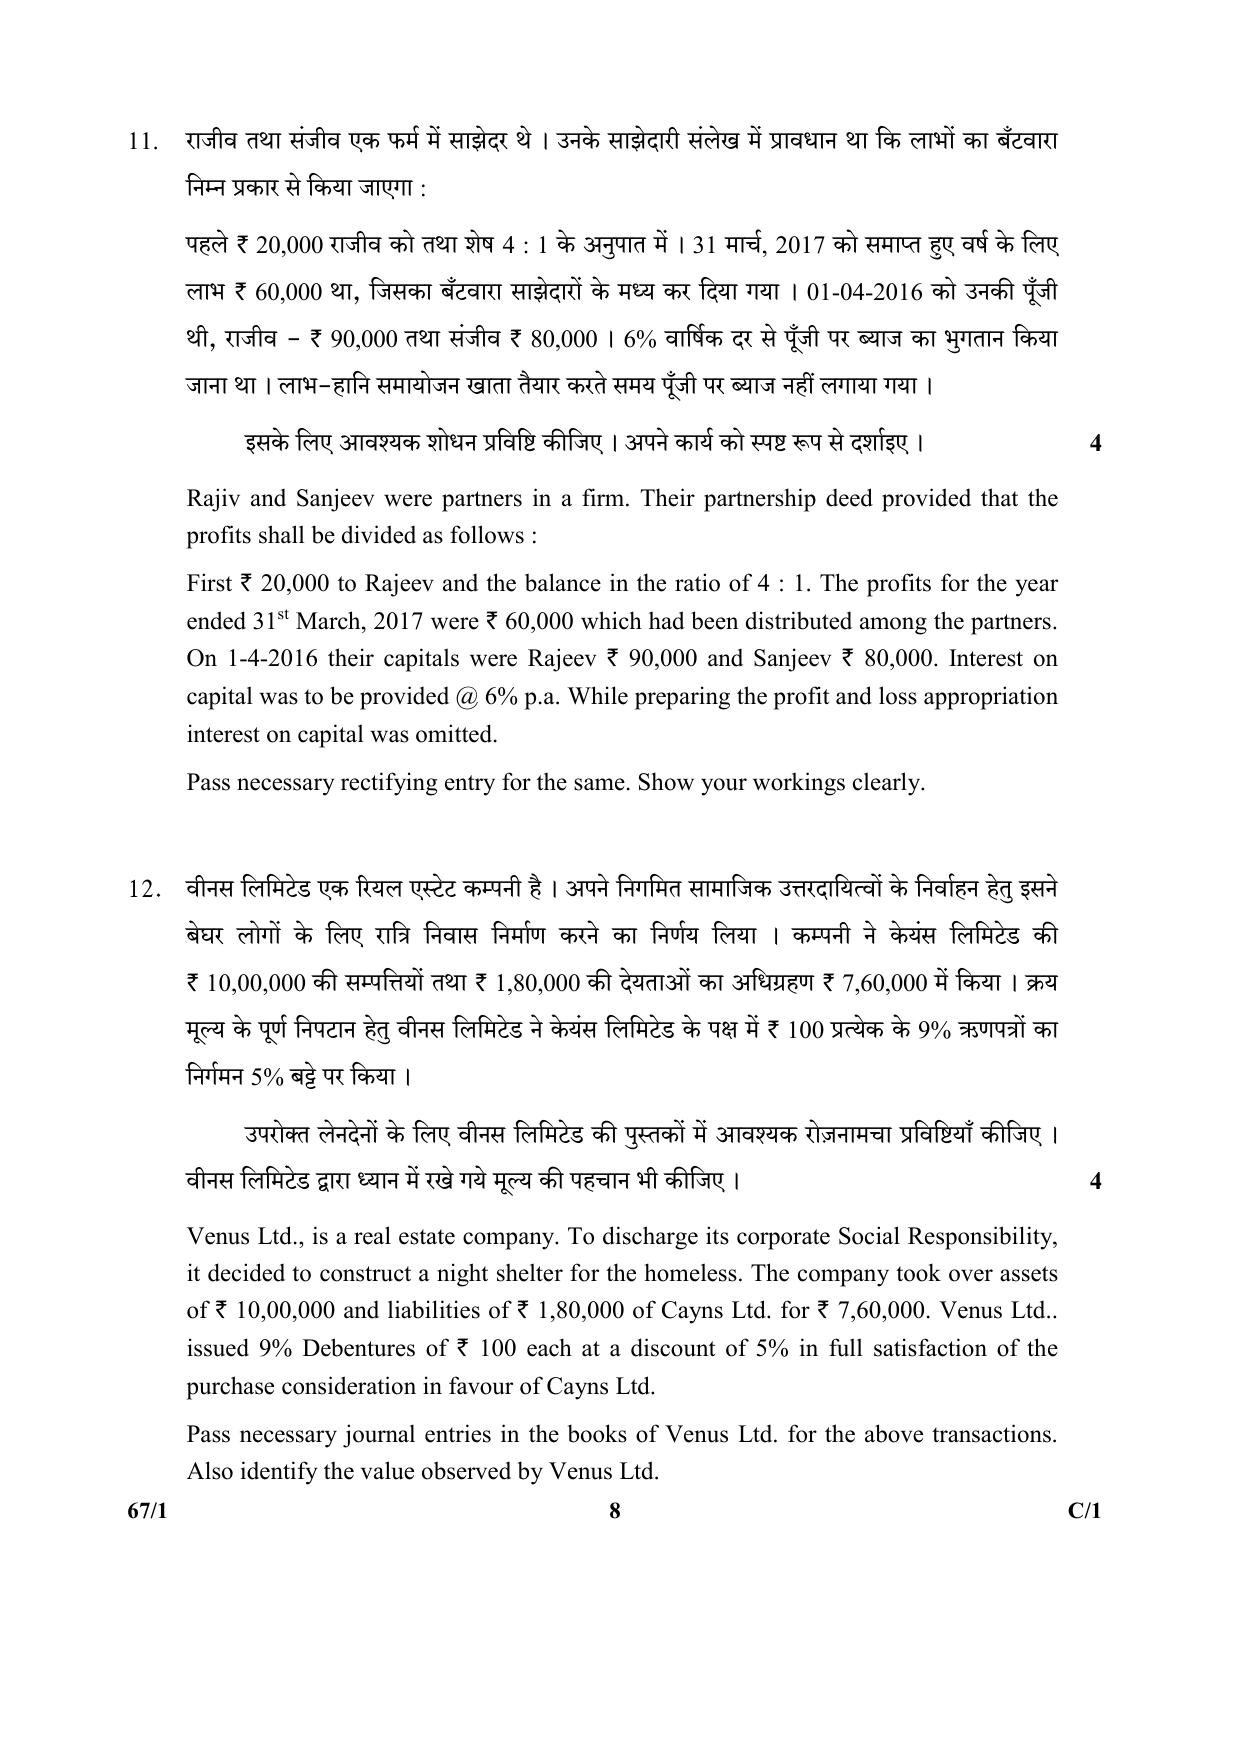 CBSE Class 12 67-1  (Accountancy) 2018 Compartment Question Paper - Page 8